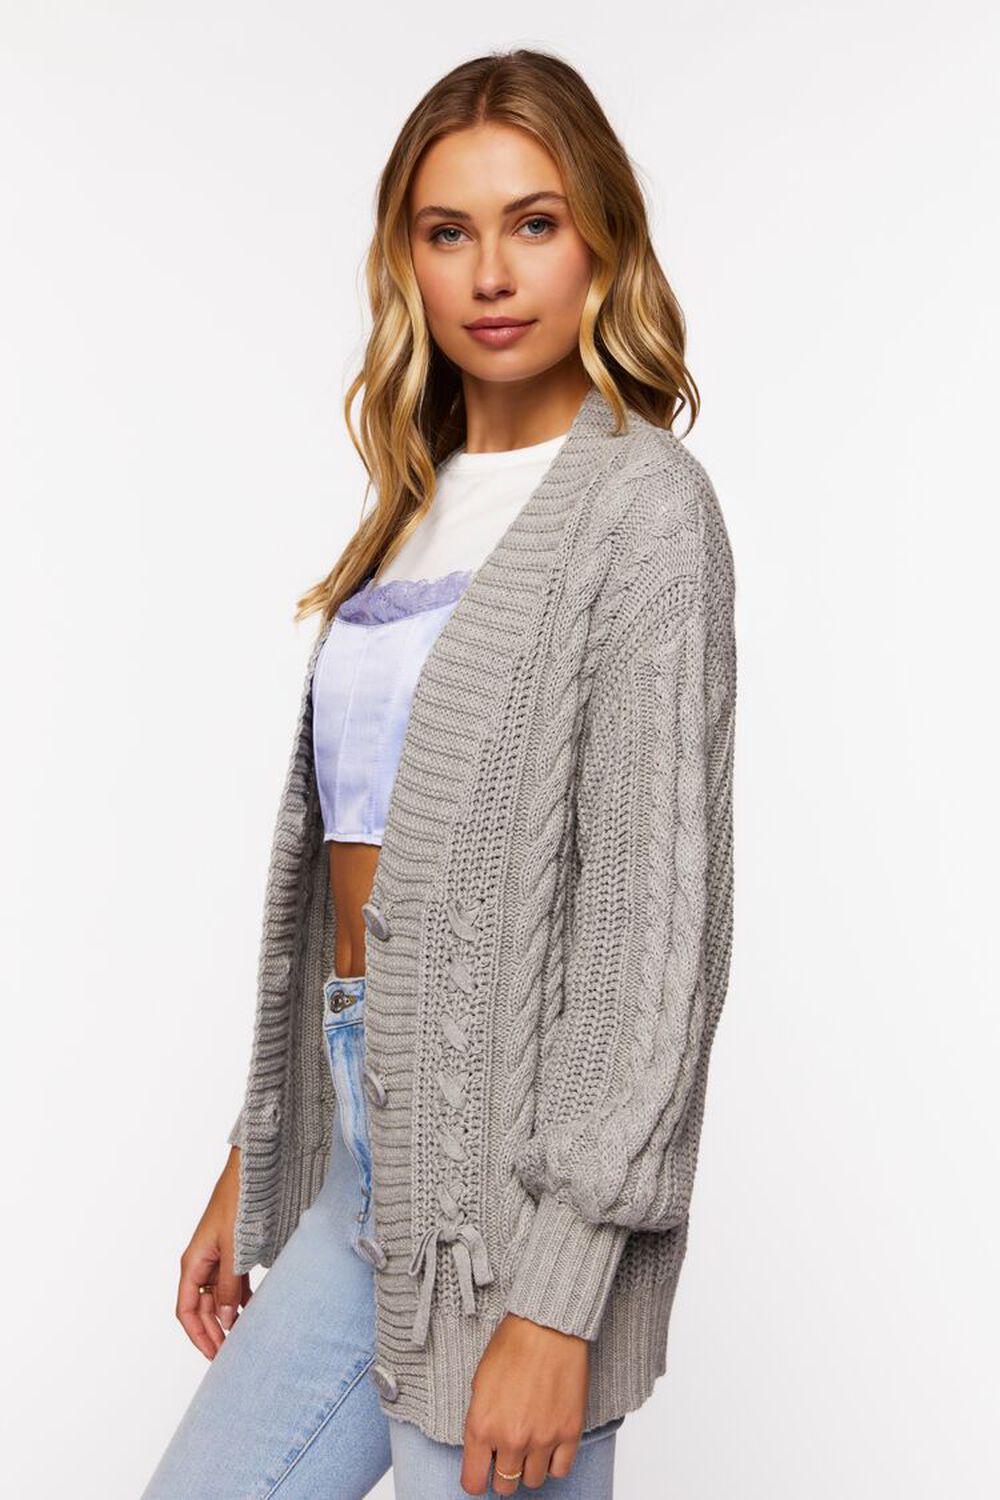 HEATHER GREY Cable Knit Cardigan Sweater, image 2